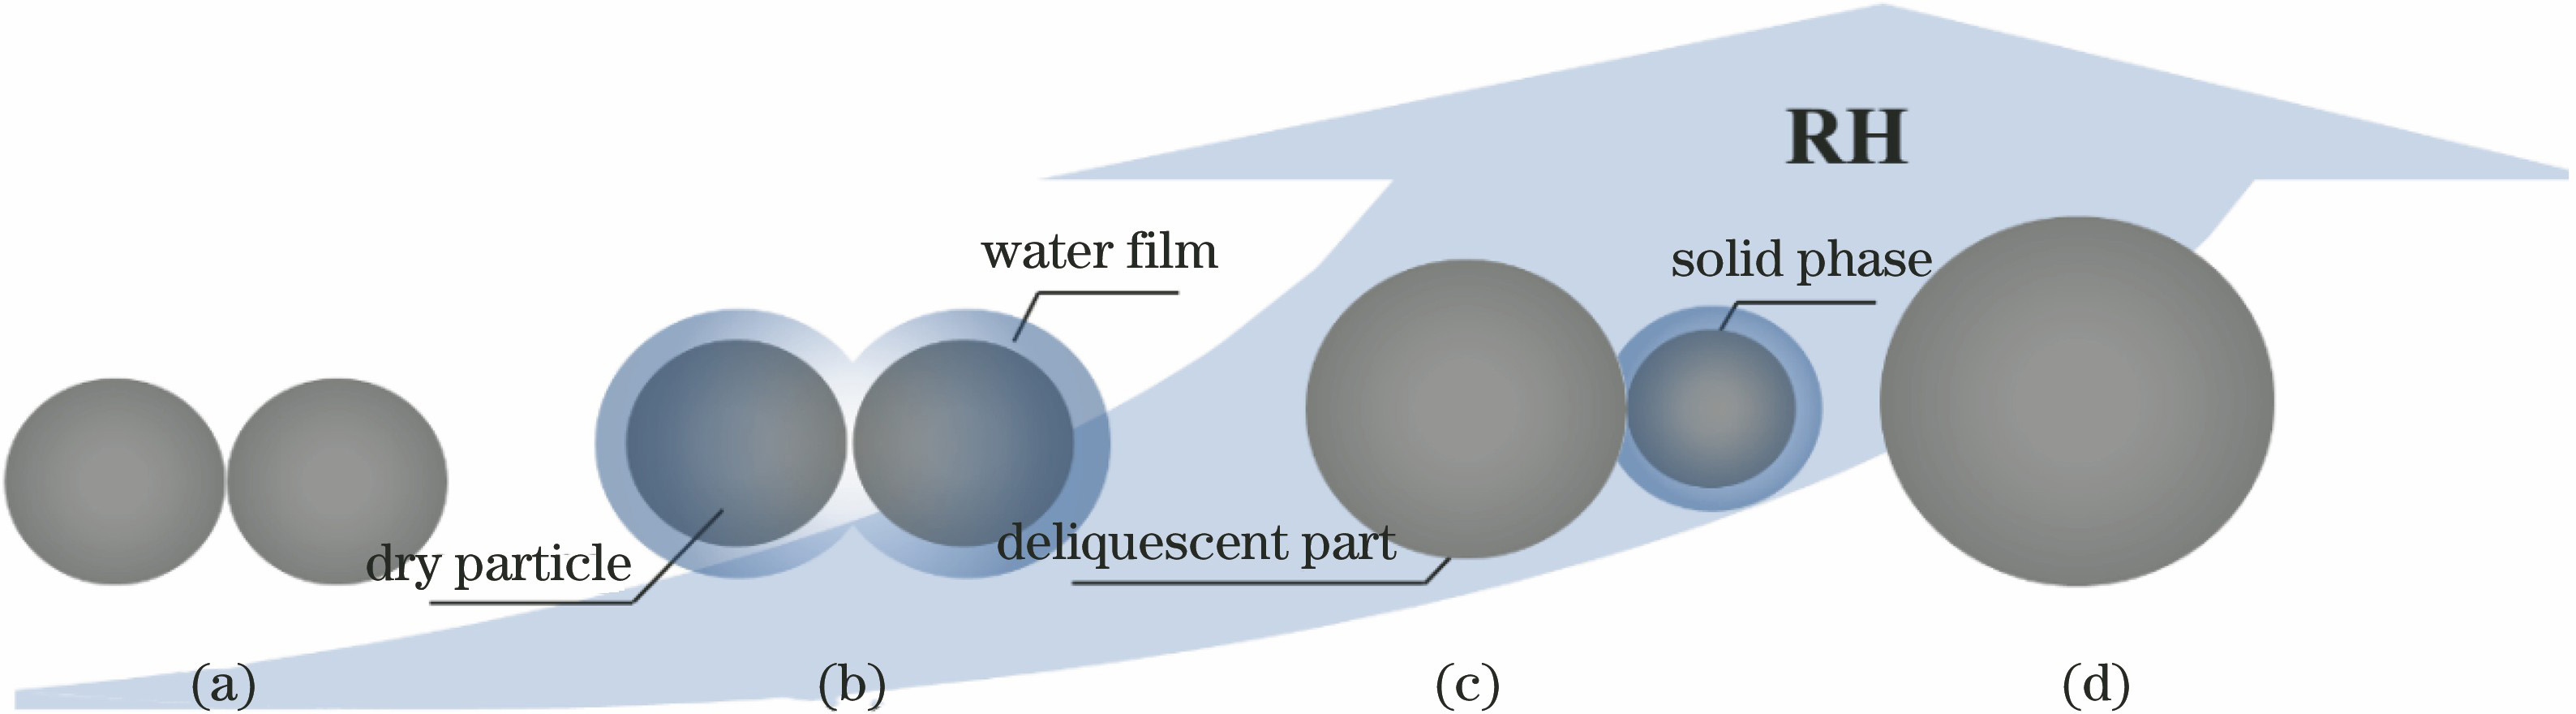 Diagram of moisture absorption model of two-particle agglomerated hydrophilic aerosol. (a) Dry agglomerated aerosol; (b) wet agglomerated aerosol before first deliquescence; (c) wet agglomerated aerosol for first deliquescence; (d) wet agglomerated aerosol for second deliquescence